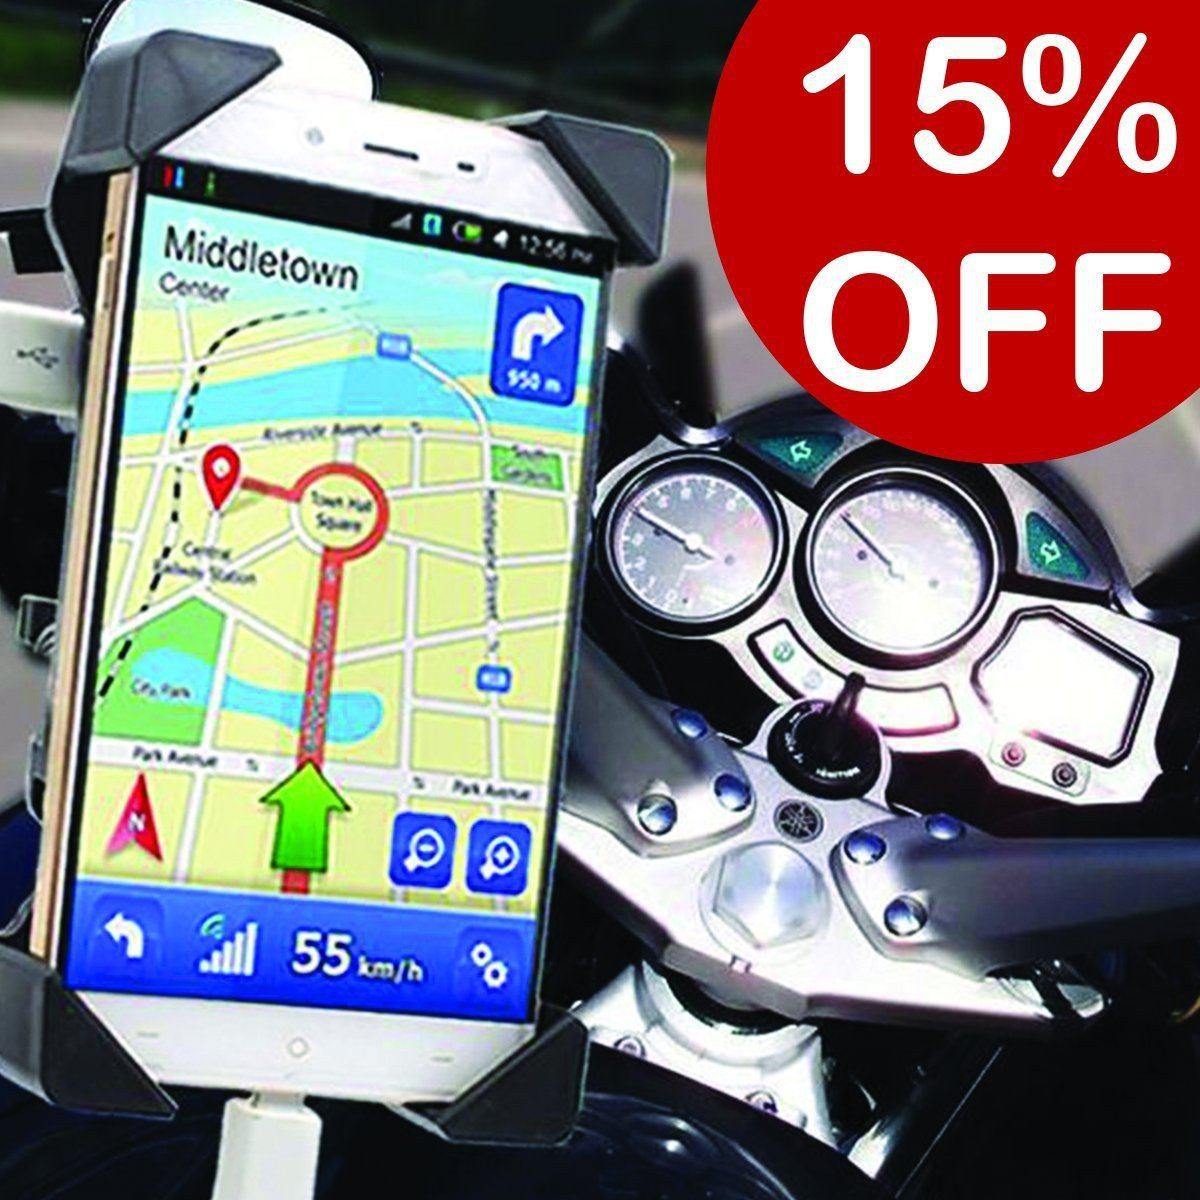 Motorcycle Phone Mount Holder with USB Charger Port, 3.5-7" Screen Fit, Universal for 7/8" Handlebar - American Legend Rider